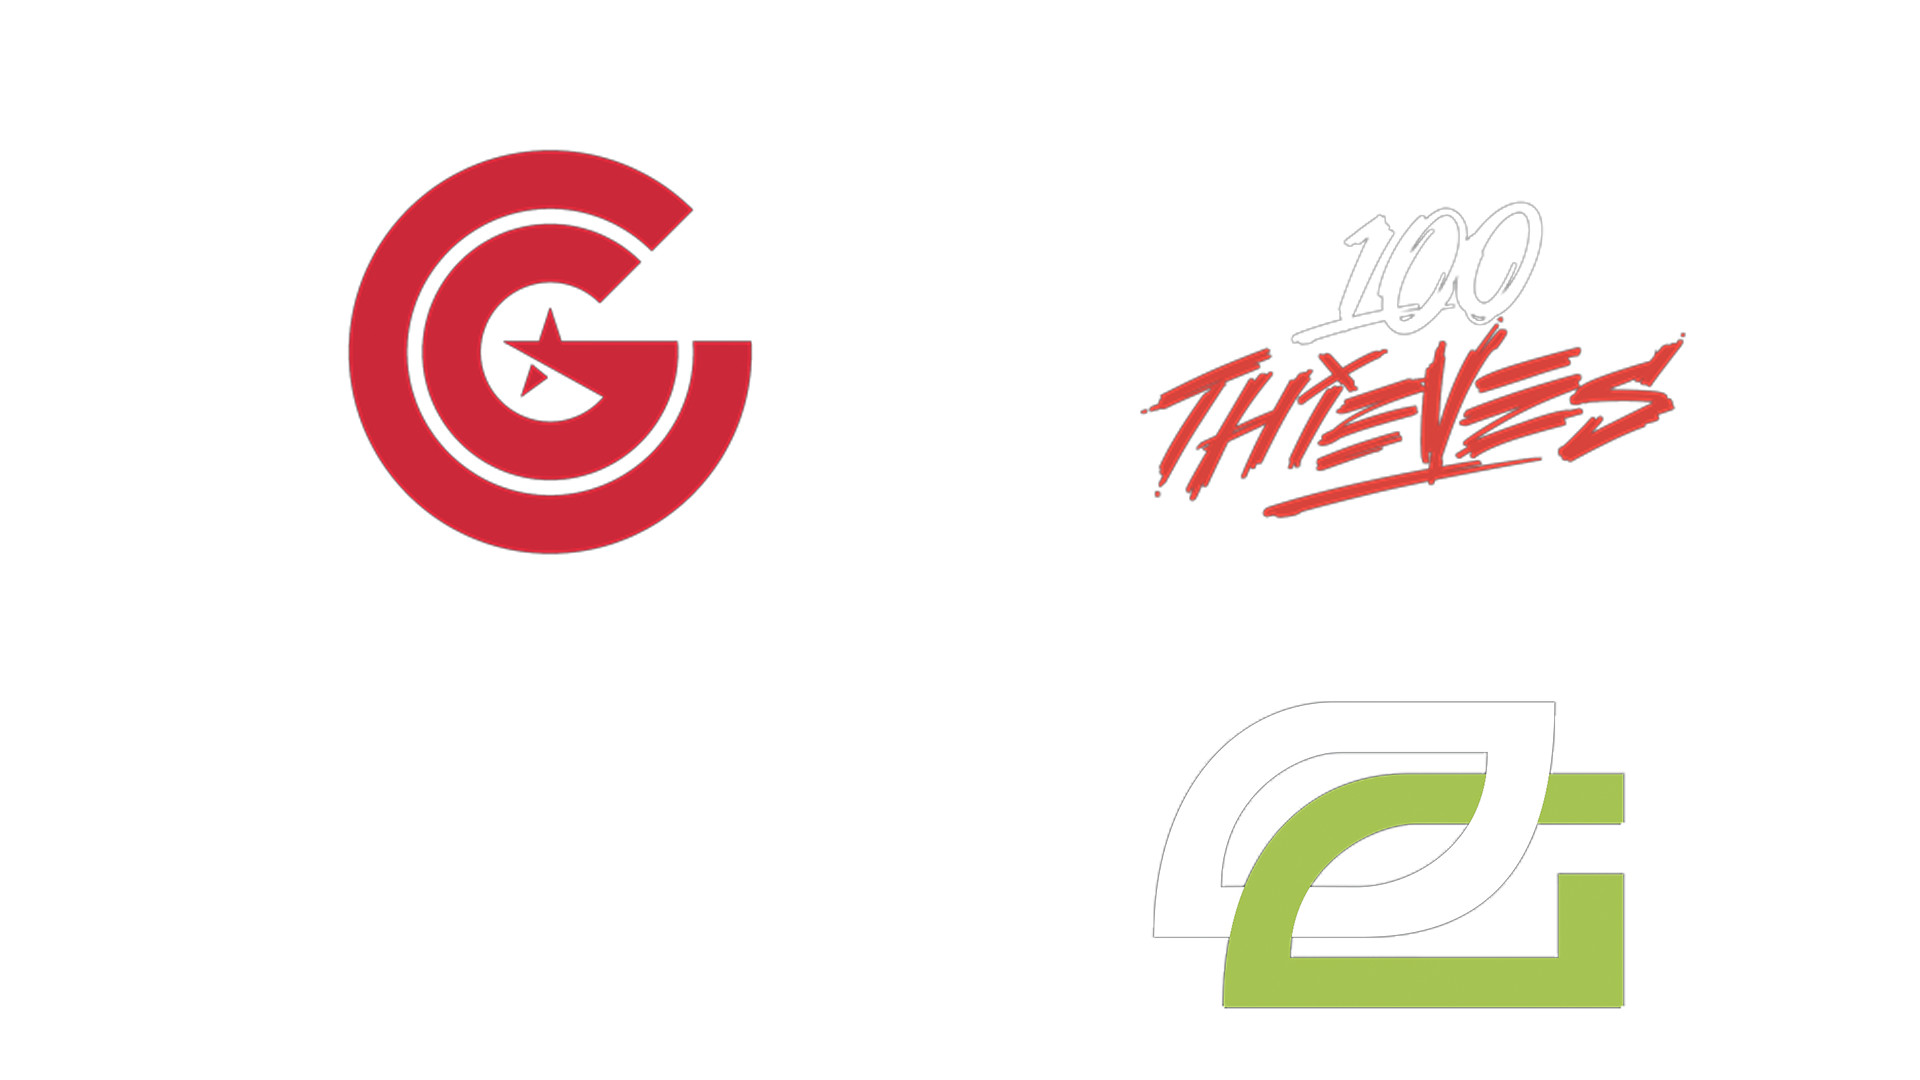 1920x1080 The only one of the new teams coming into the NA LCS with esports  experience is OpTic Gaming. The org rose to fame in the Call of Duty scene  and then moved ...